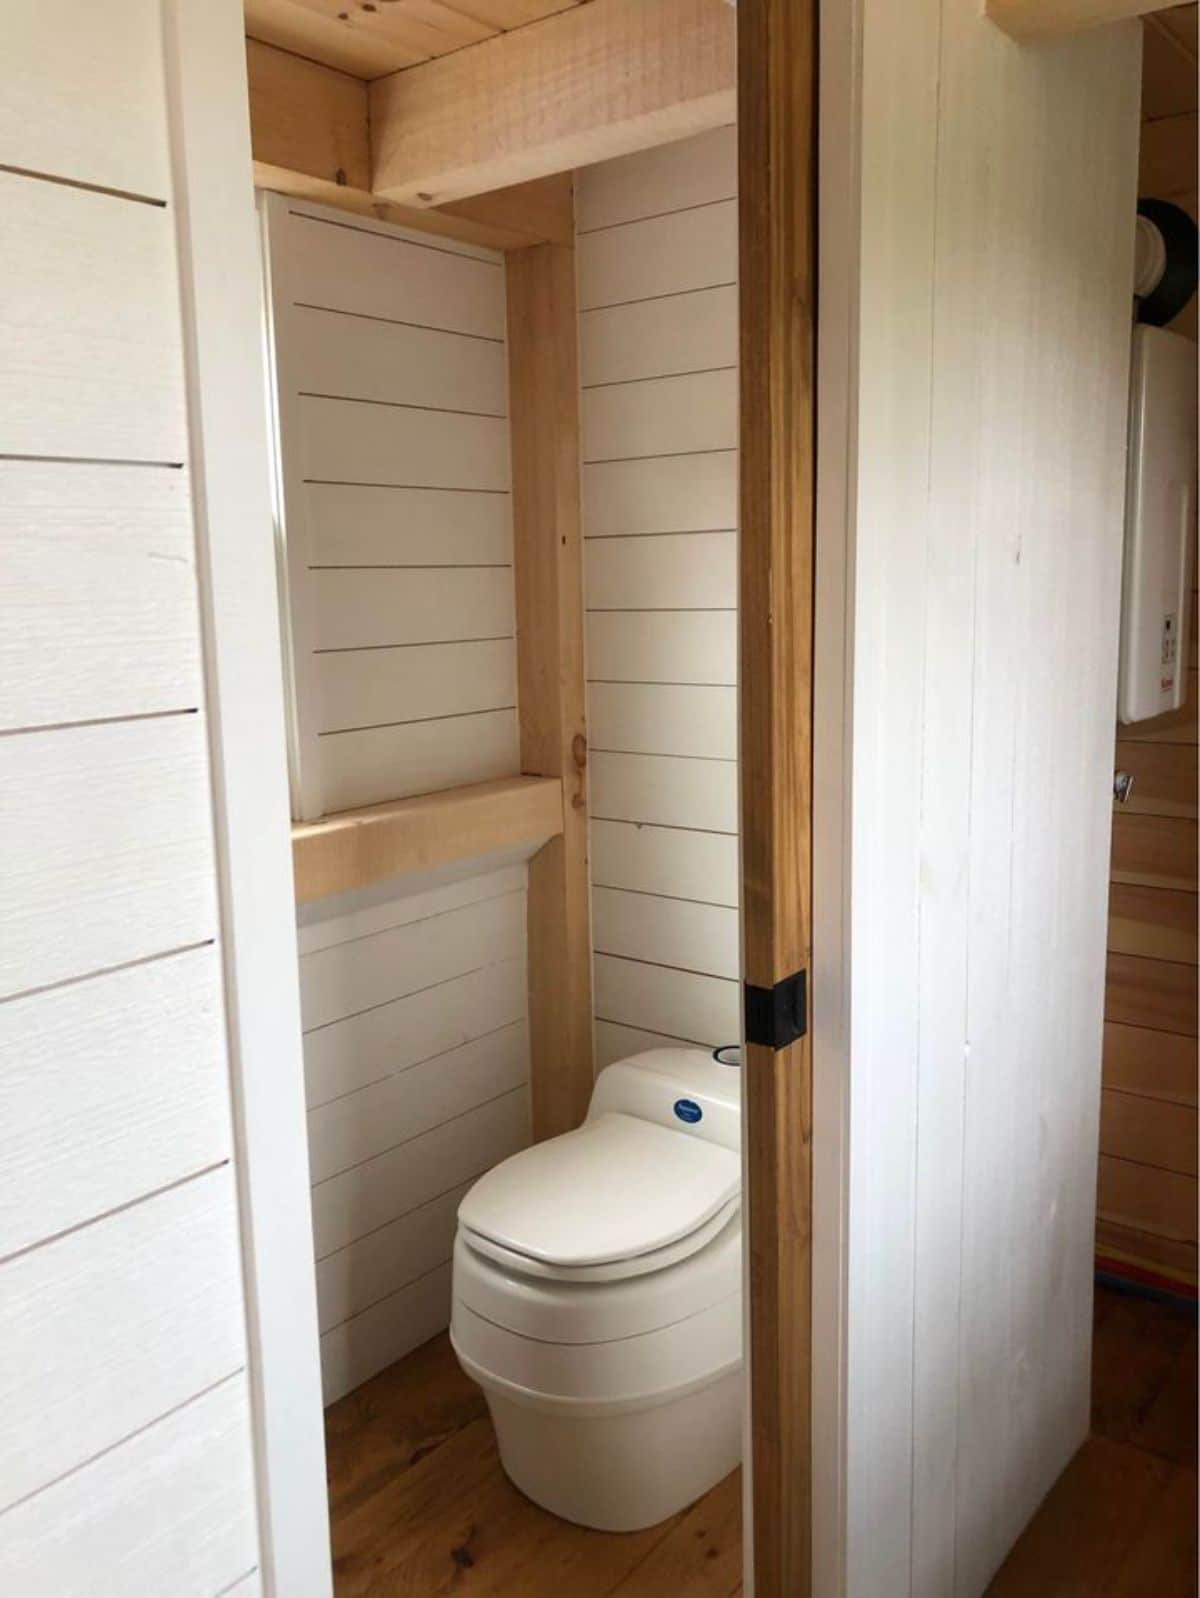 Toilet in bathroom of 26’ Timber Framed Tiny House